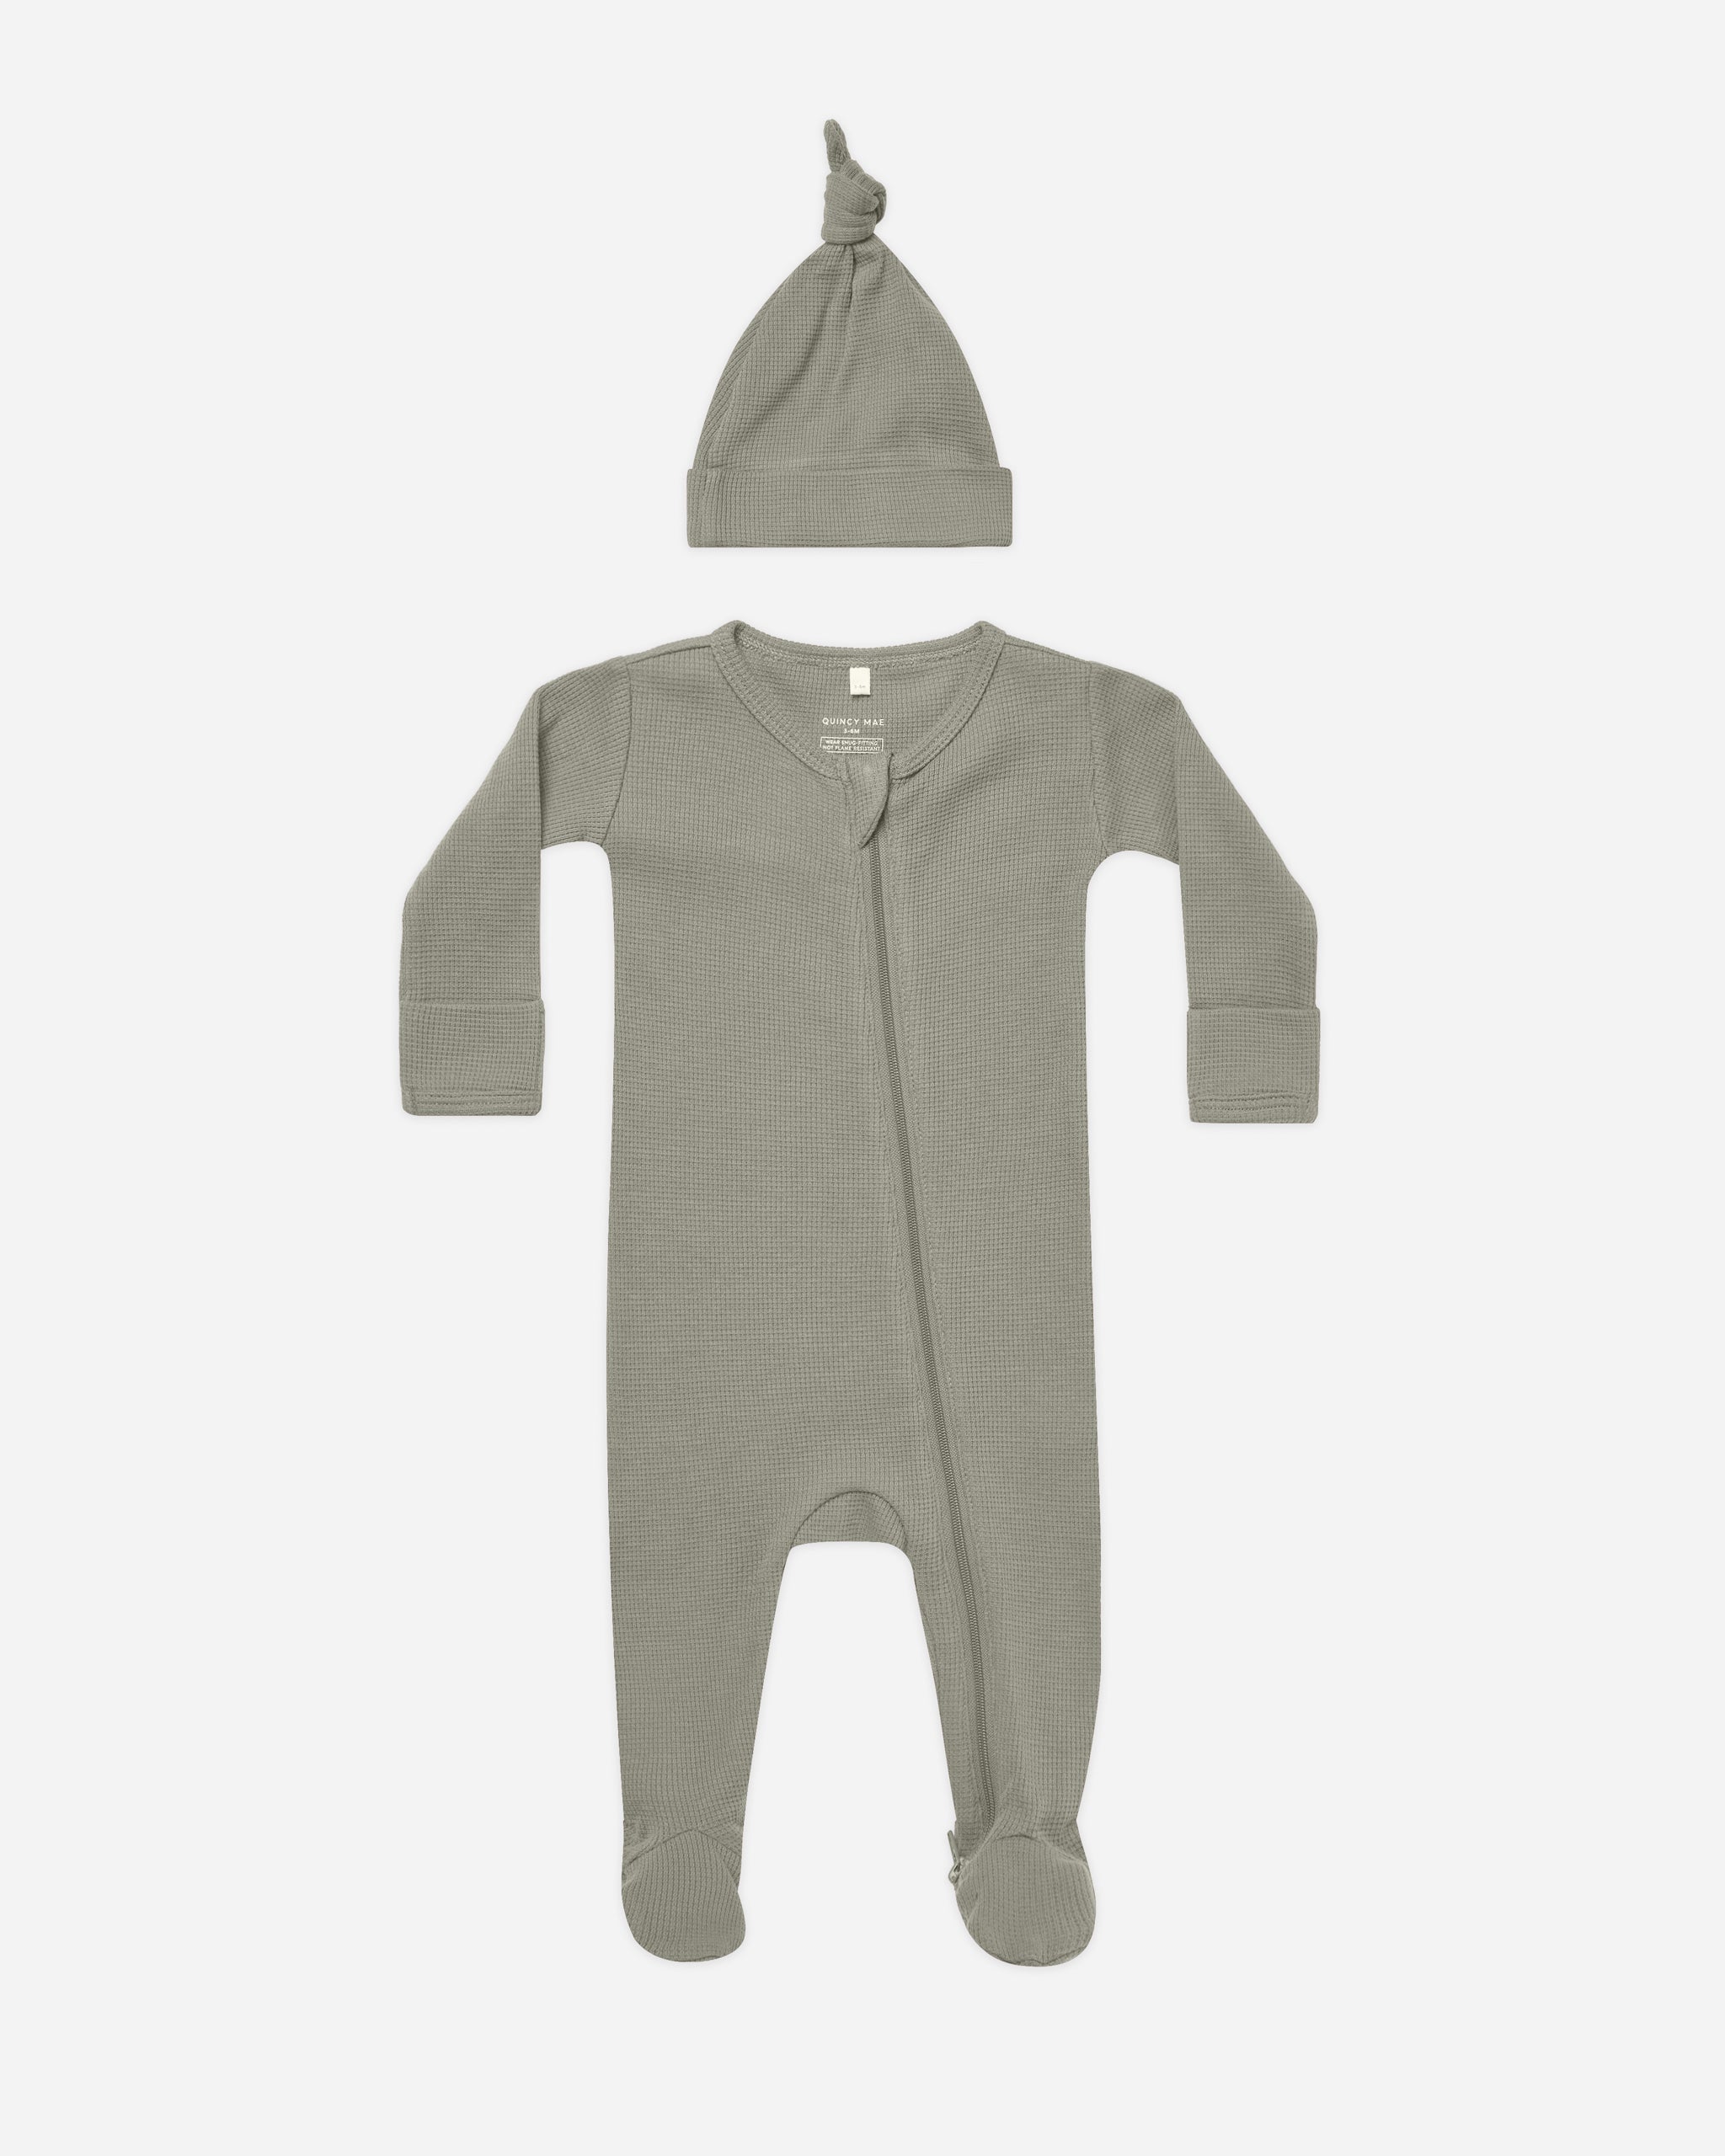 Waffle Sleep Set || Basil - Rylee + Cru | Kids Clothes | Trendy Baby Clothes | Modern Infant Outfits |